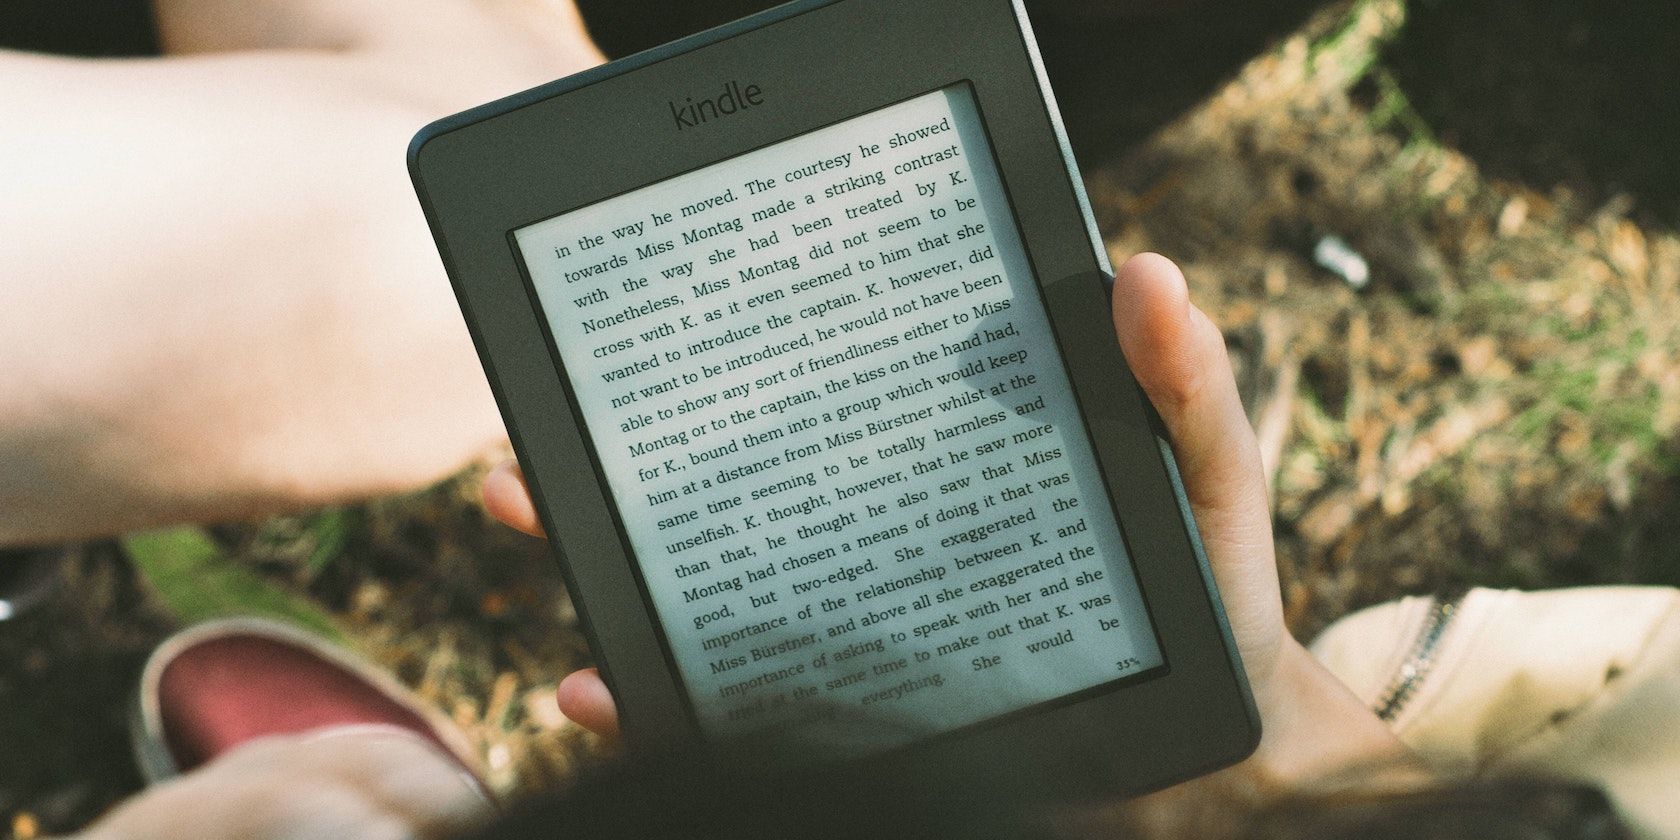 A person reading a Kindle outdoors.